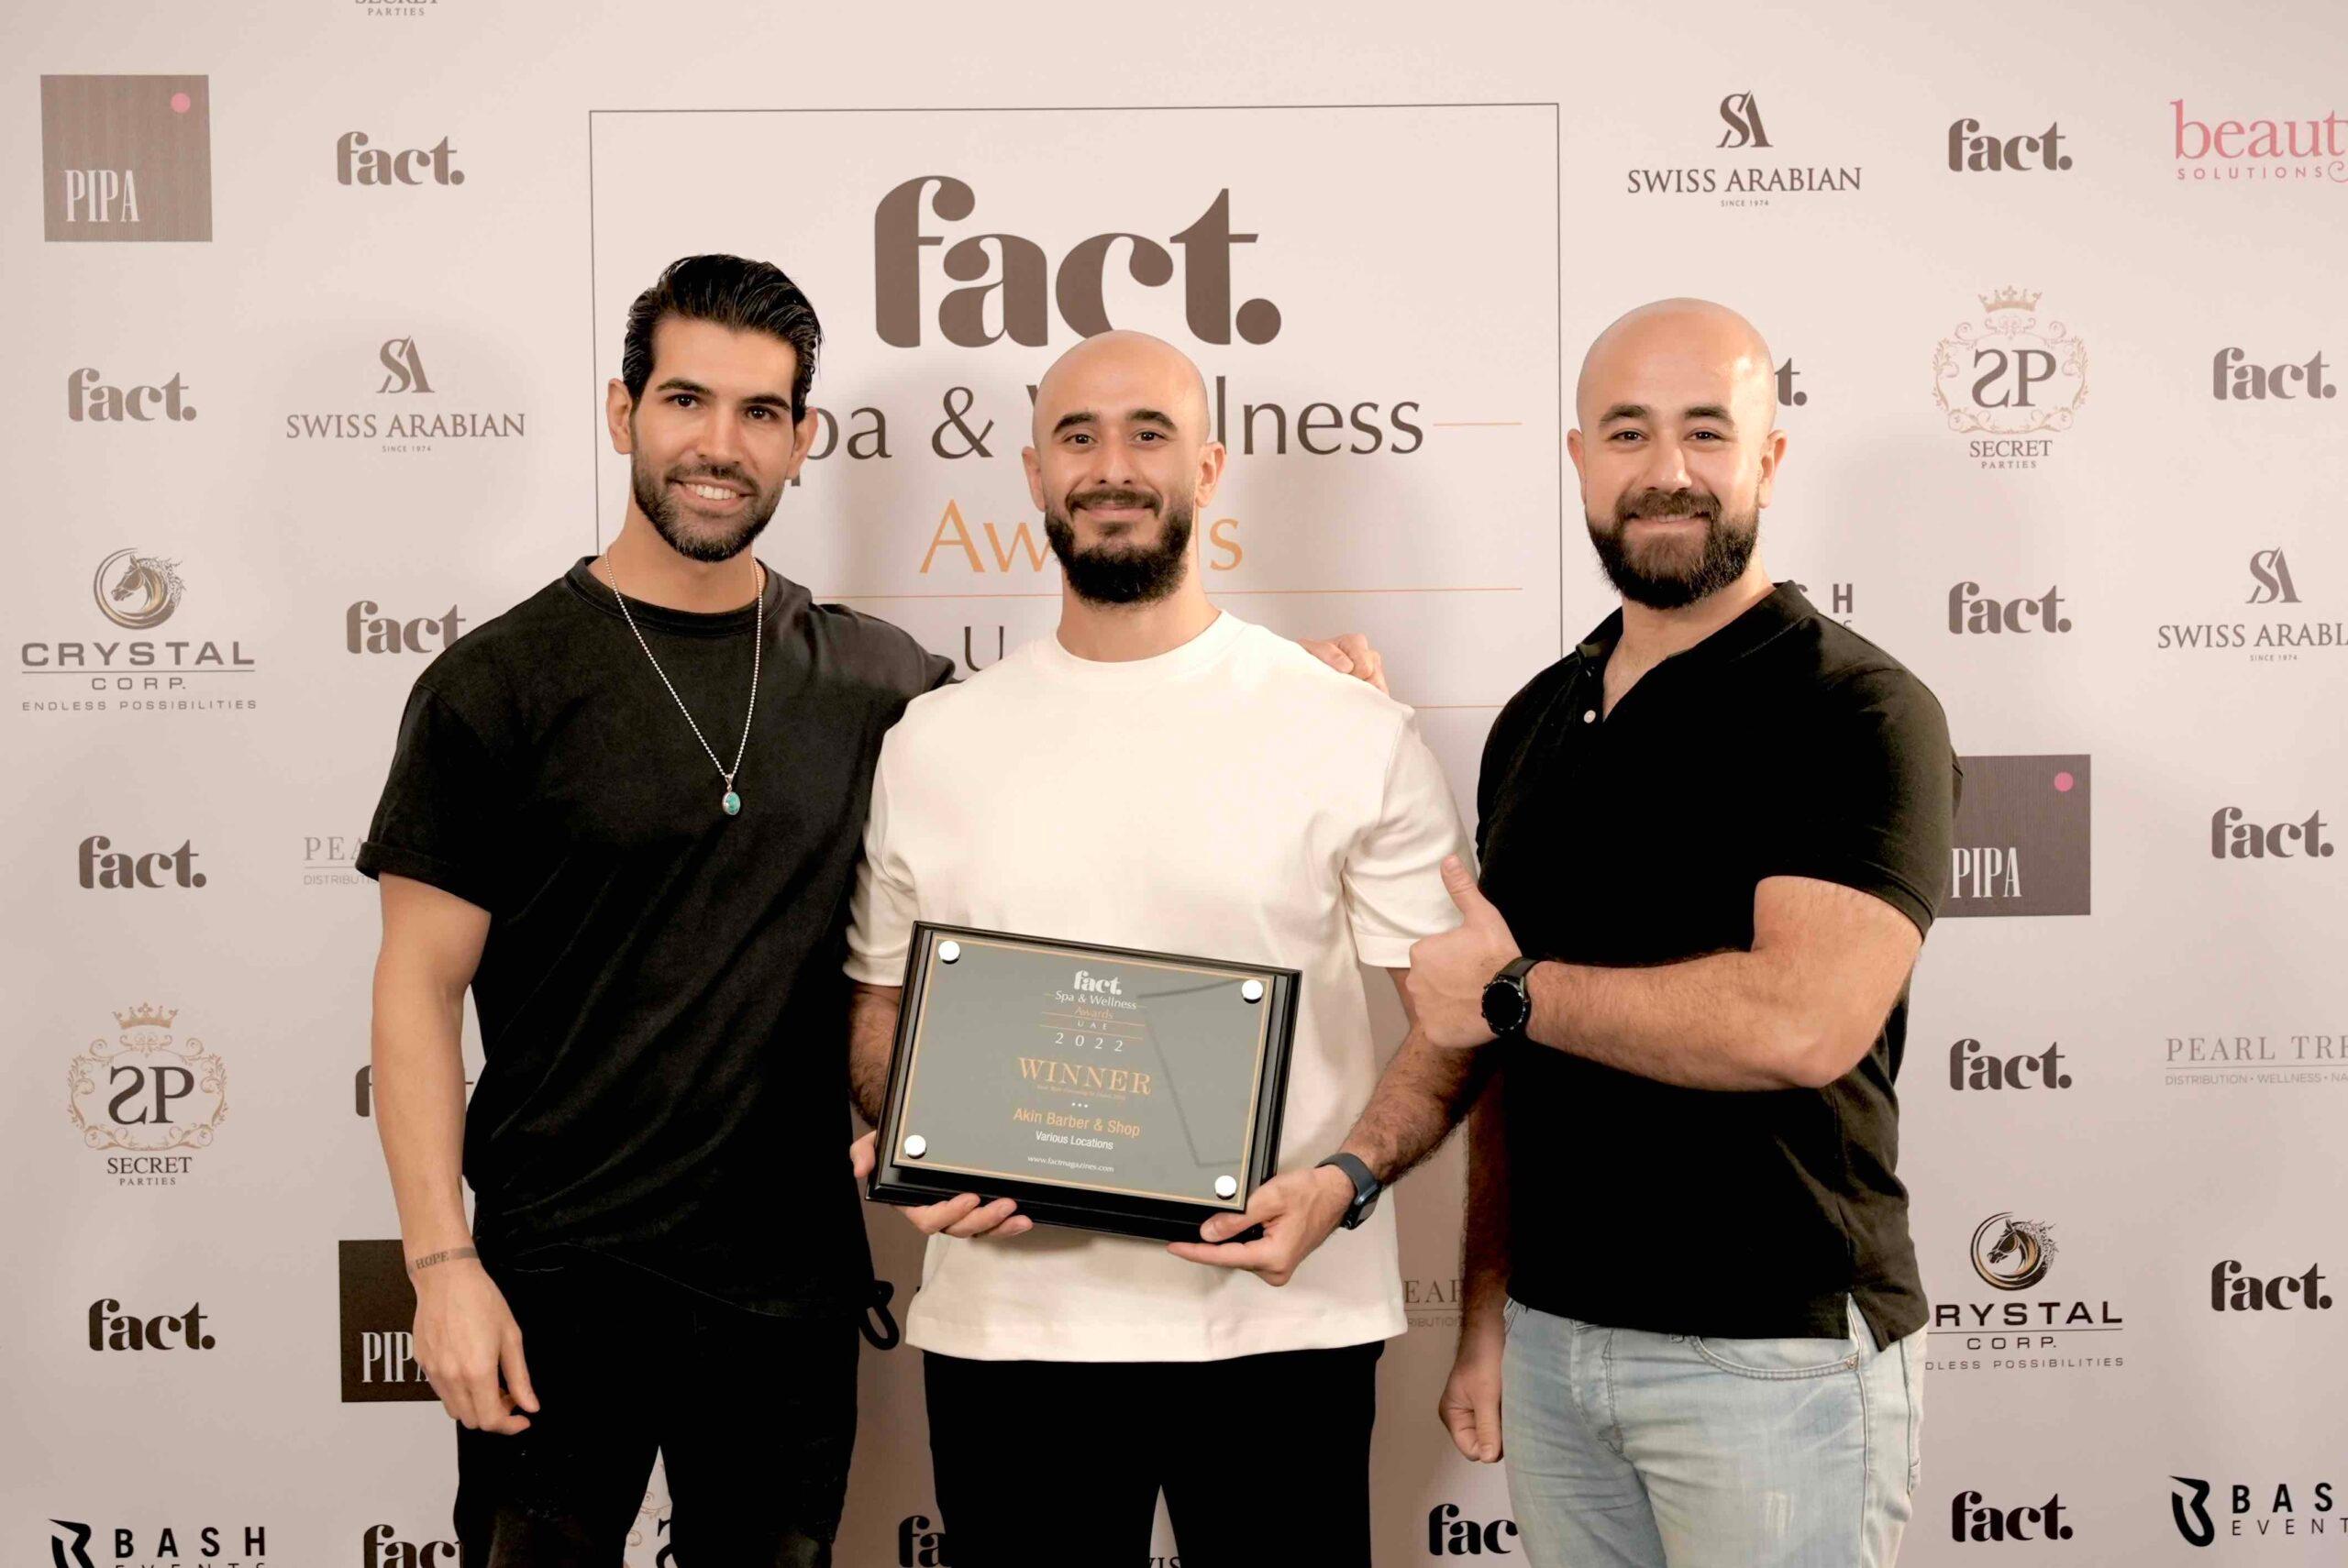 FACT Spa & Wellness Awards: How the winners are chosen